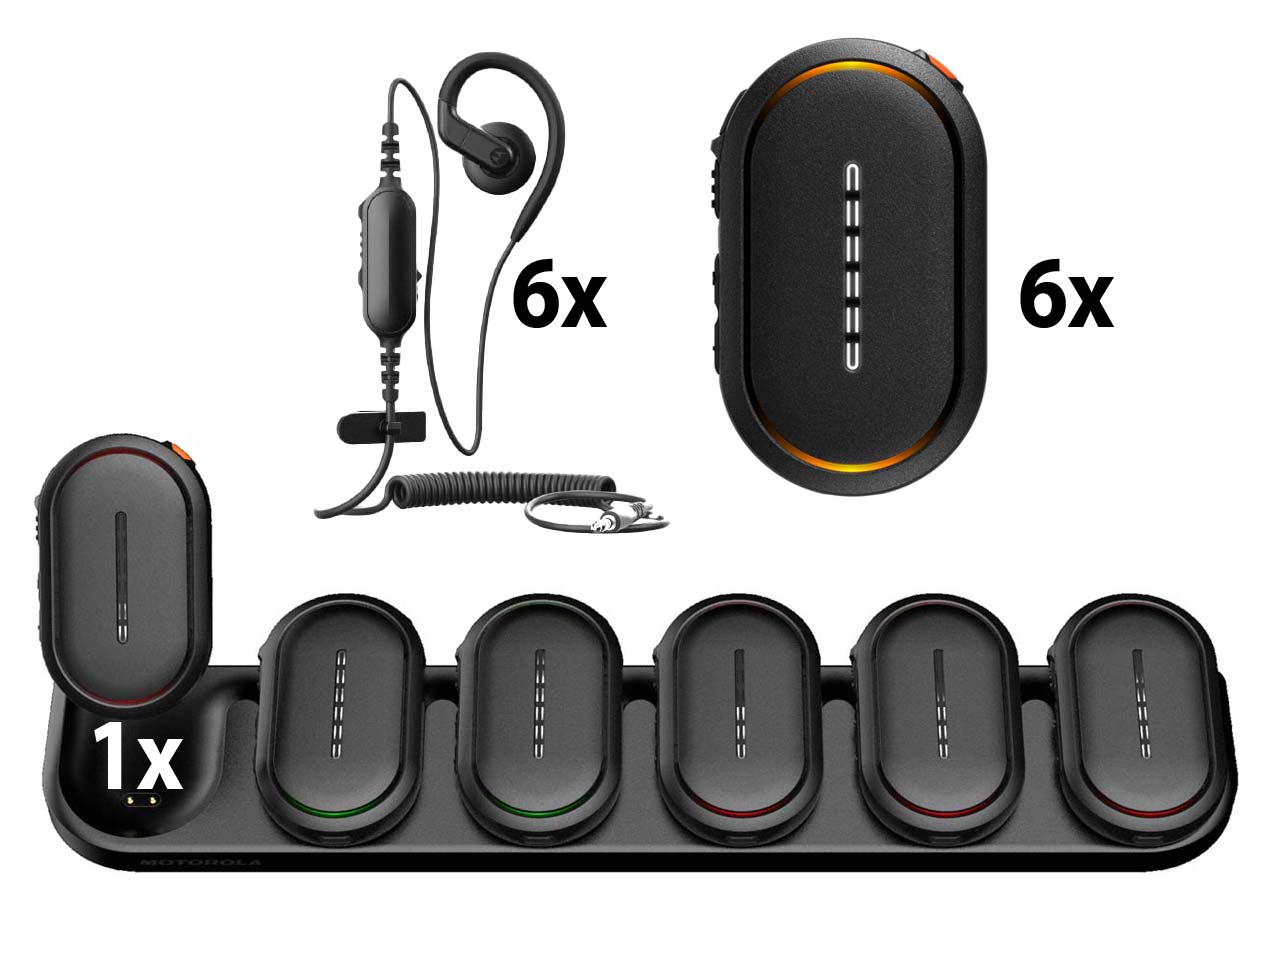 SET 6x Motorola TLK 25 WAVE PTX radio WiFi with multiunit charger and earpiece HK2205A